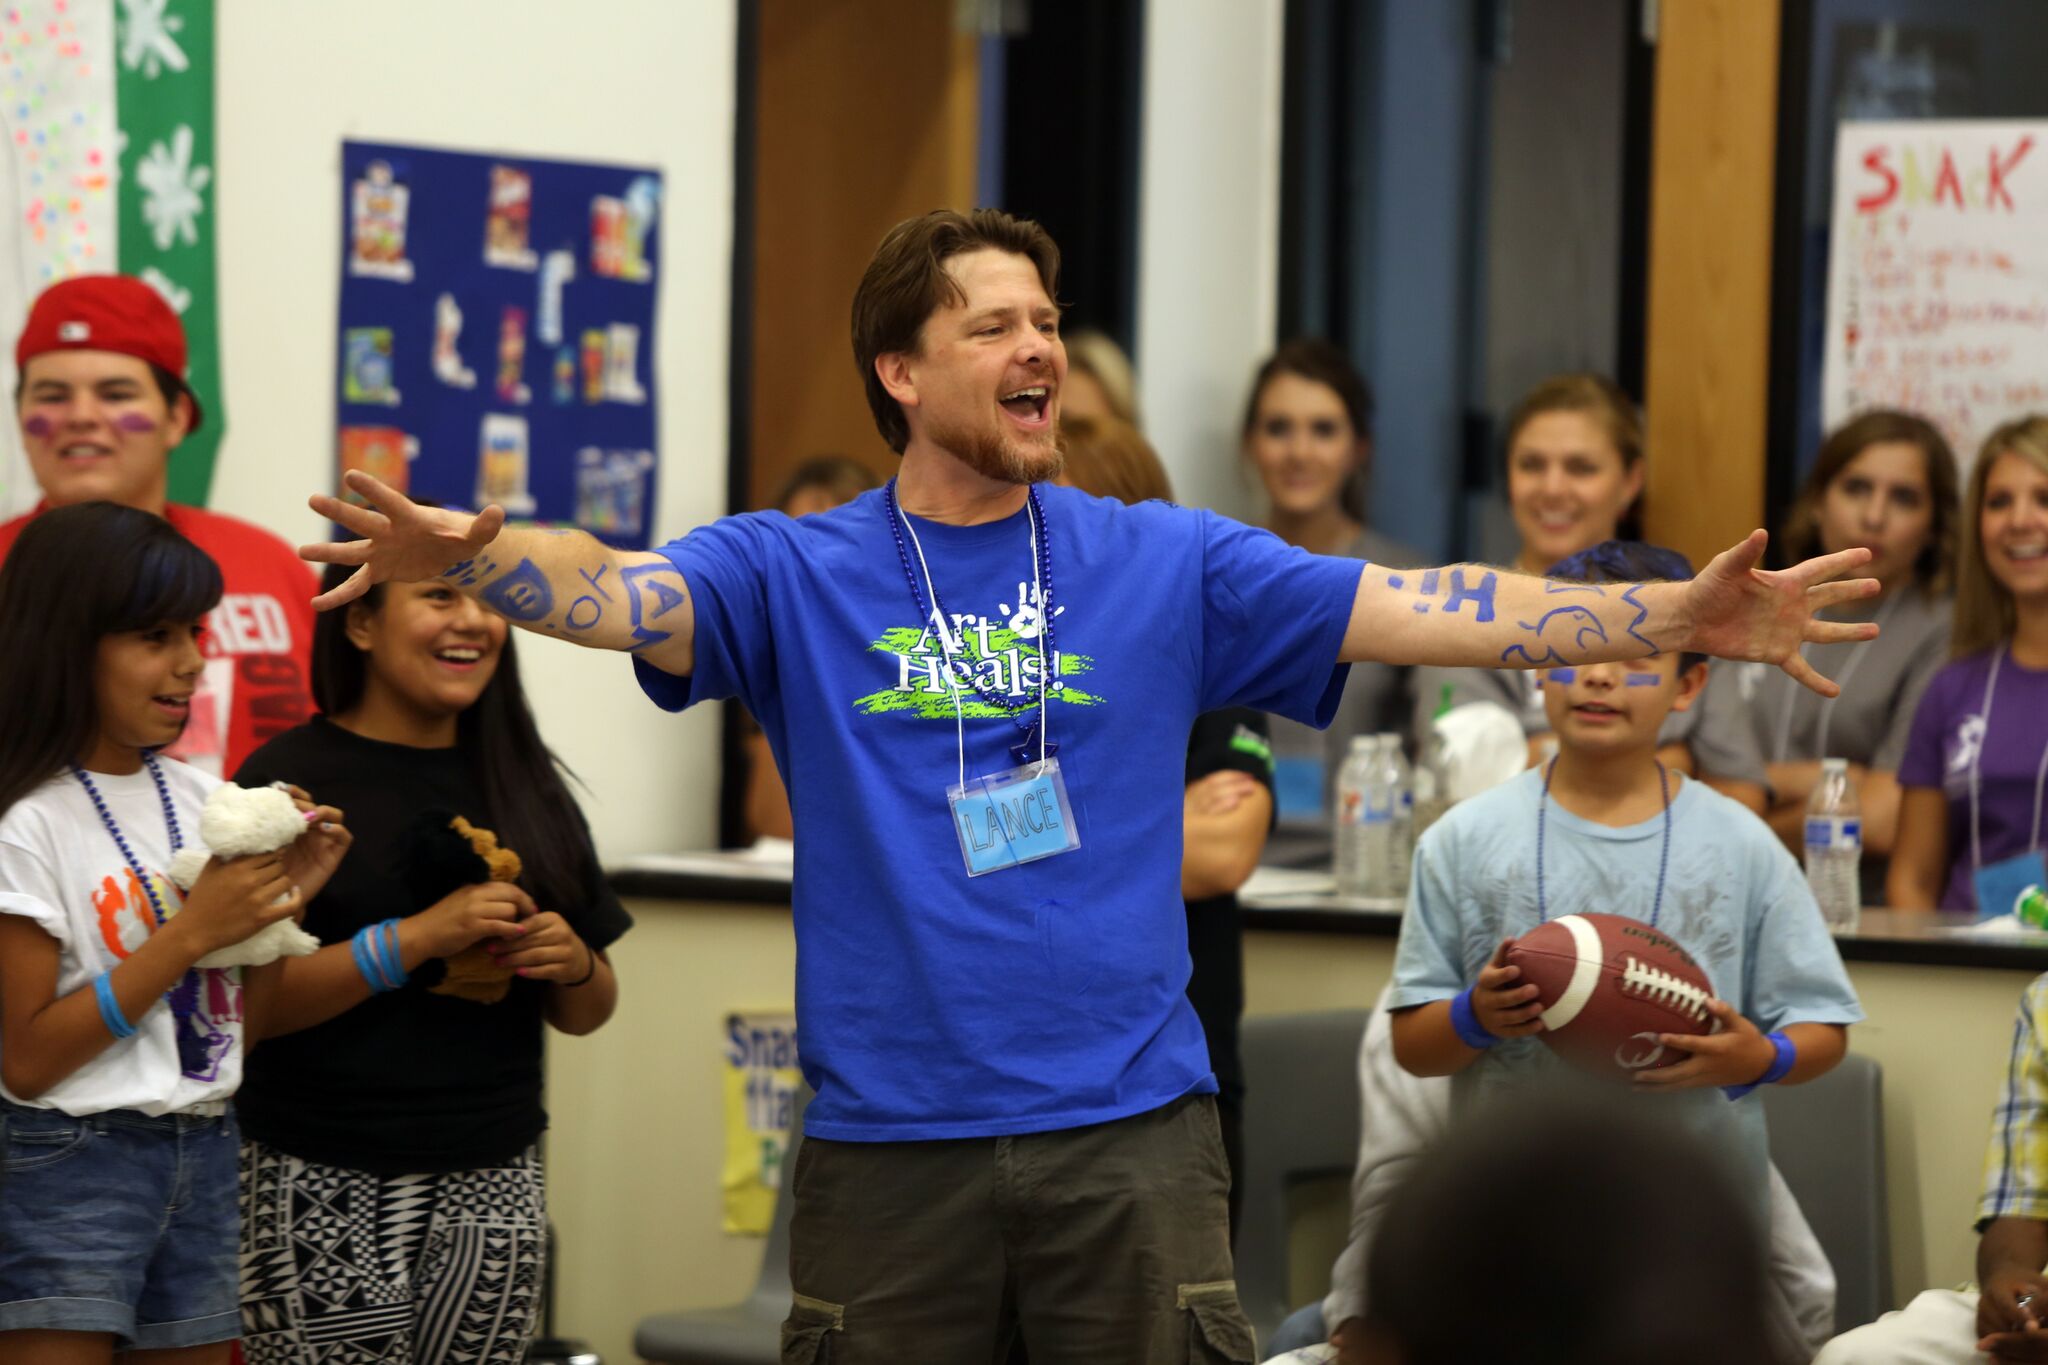 Free Arts mentor Lance Turner performs with the children at Camp 2015 Photo by Lisa Olson